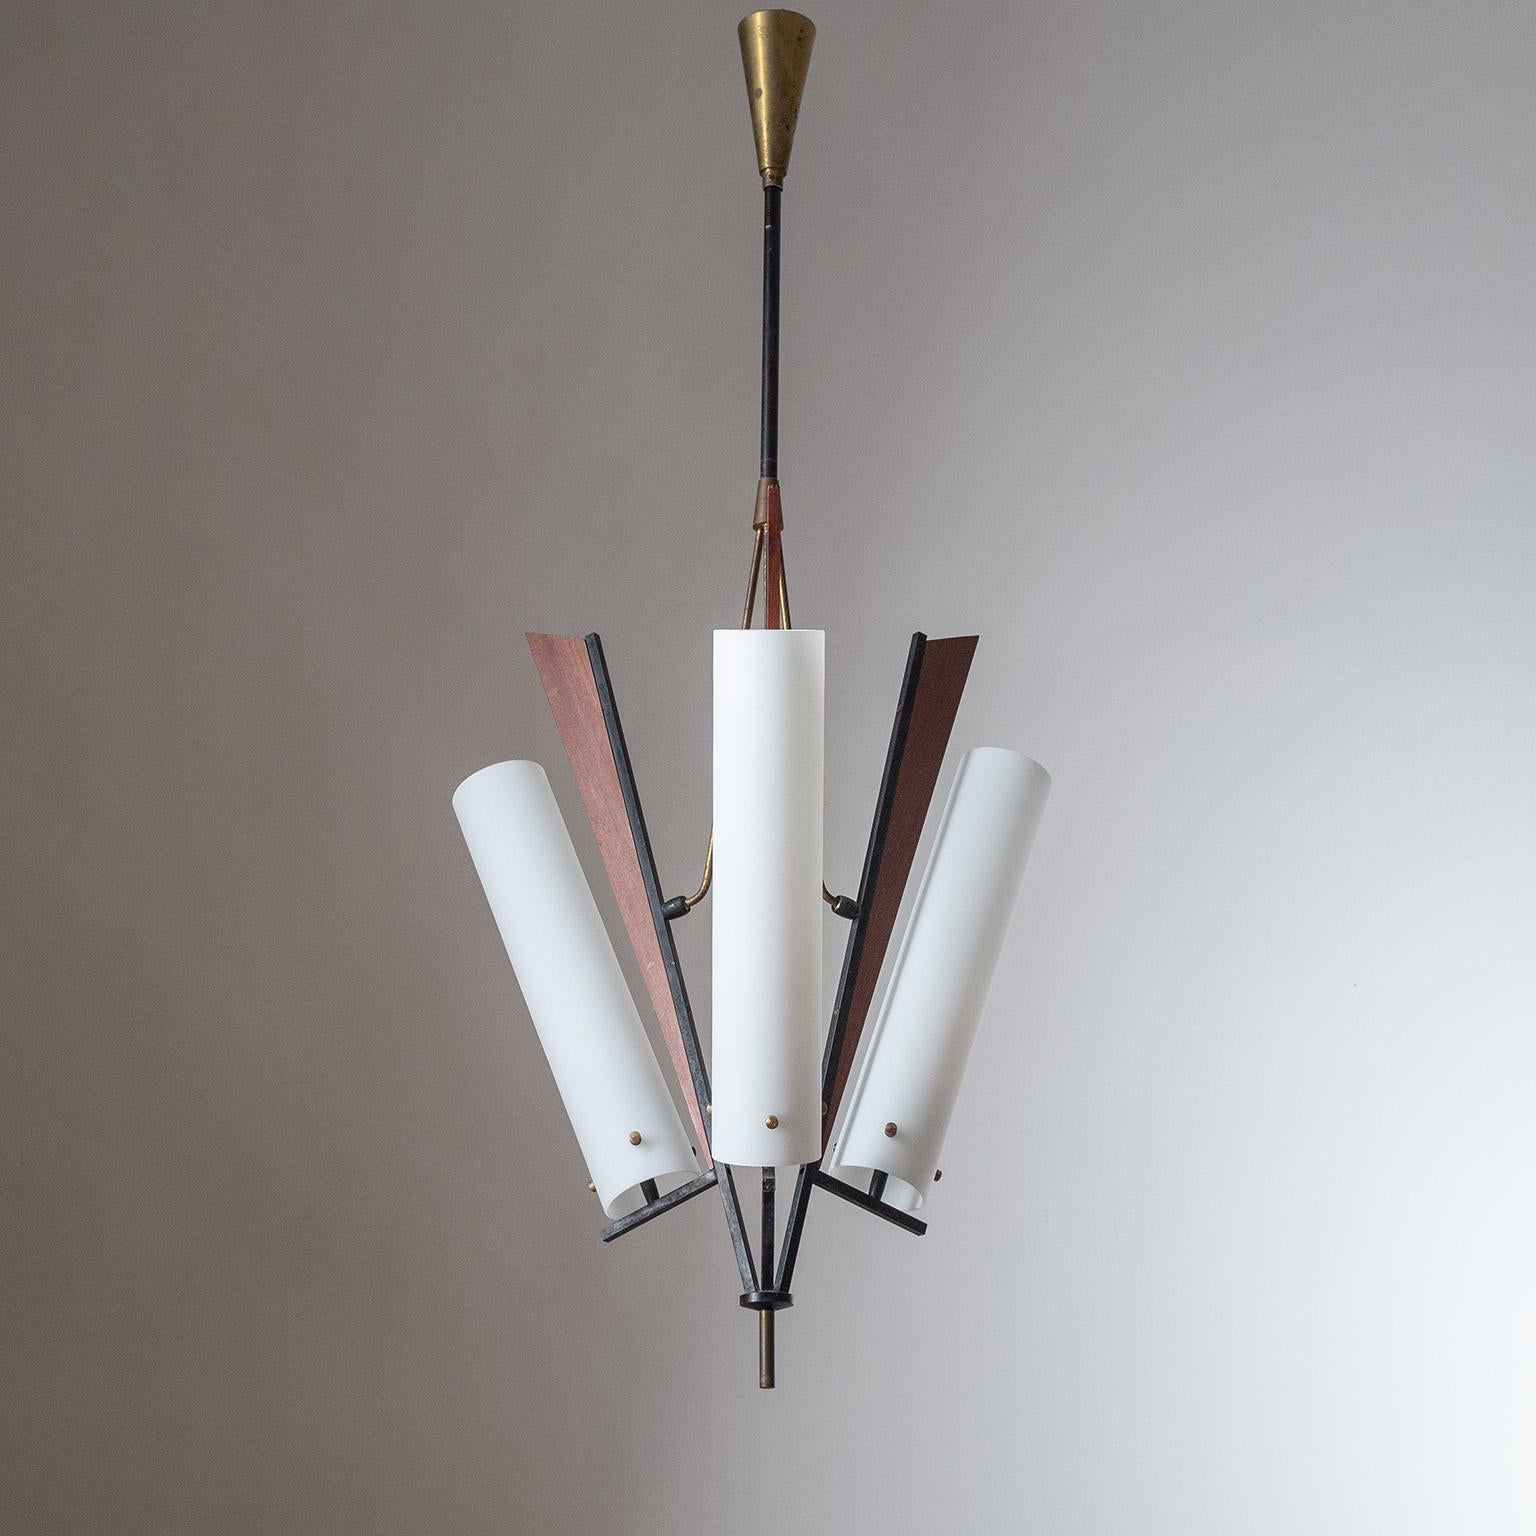 Rare Italian modernist chandelier from the 1950s. Very unique and dynamic three-arm structure made of lacquered brass with teak details. Long tubular diffusers made of 'triplex opal' glass. Three E14 sockets with new wiring.